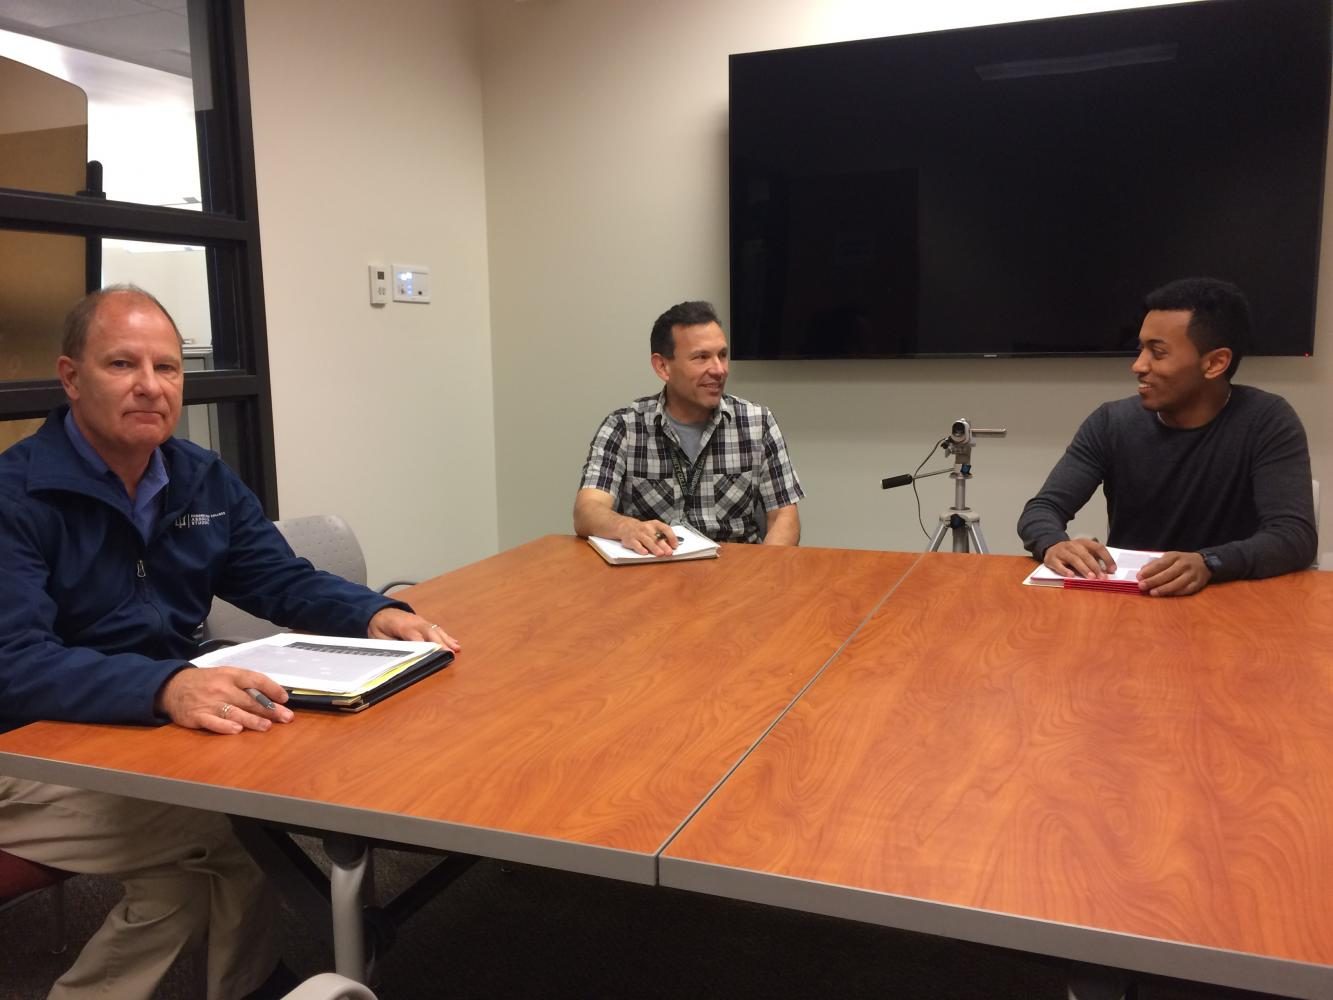 Members of the executive officer committee convened on June 8, preparing to interview an executive board candidate. Naol Debele (right) and Jorge de la Torre (center) chat while Wayne Anthony (left) solemnly regrets cheeky grins and retorts of bygone days. 